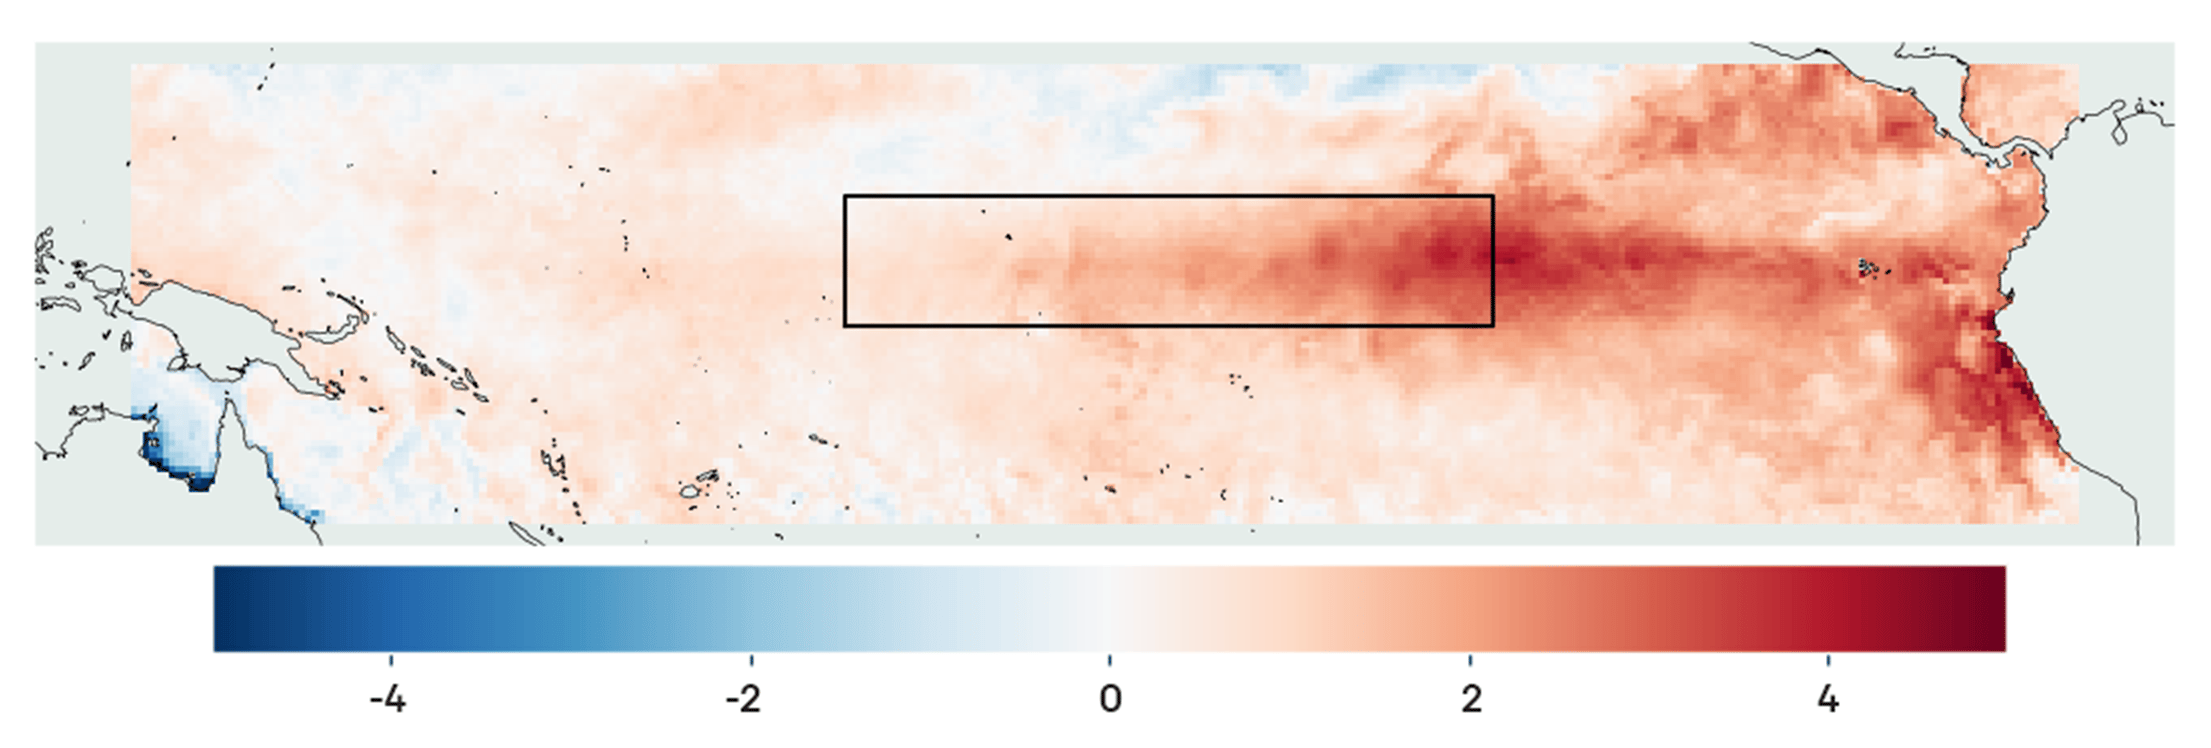 Sea surface temperature in the El Niño region in May 2023. By comparing this signature against that of other events, such as that of 2016, we can deduce that a strong El Niño event may well be on its way (El Niño event signatures usually peak around December).